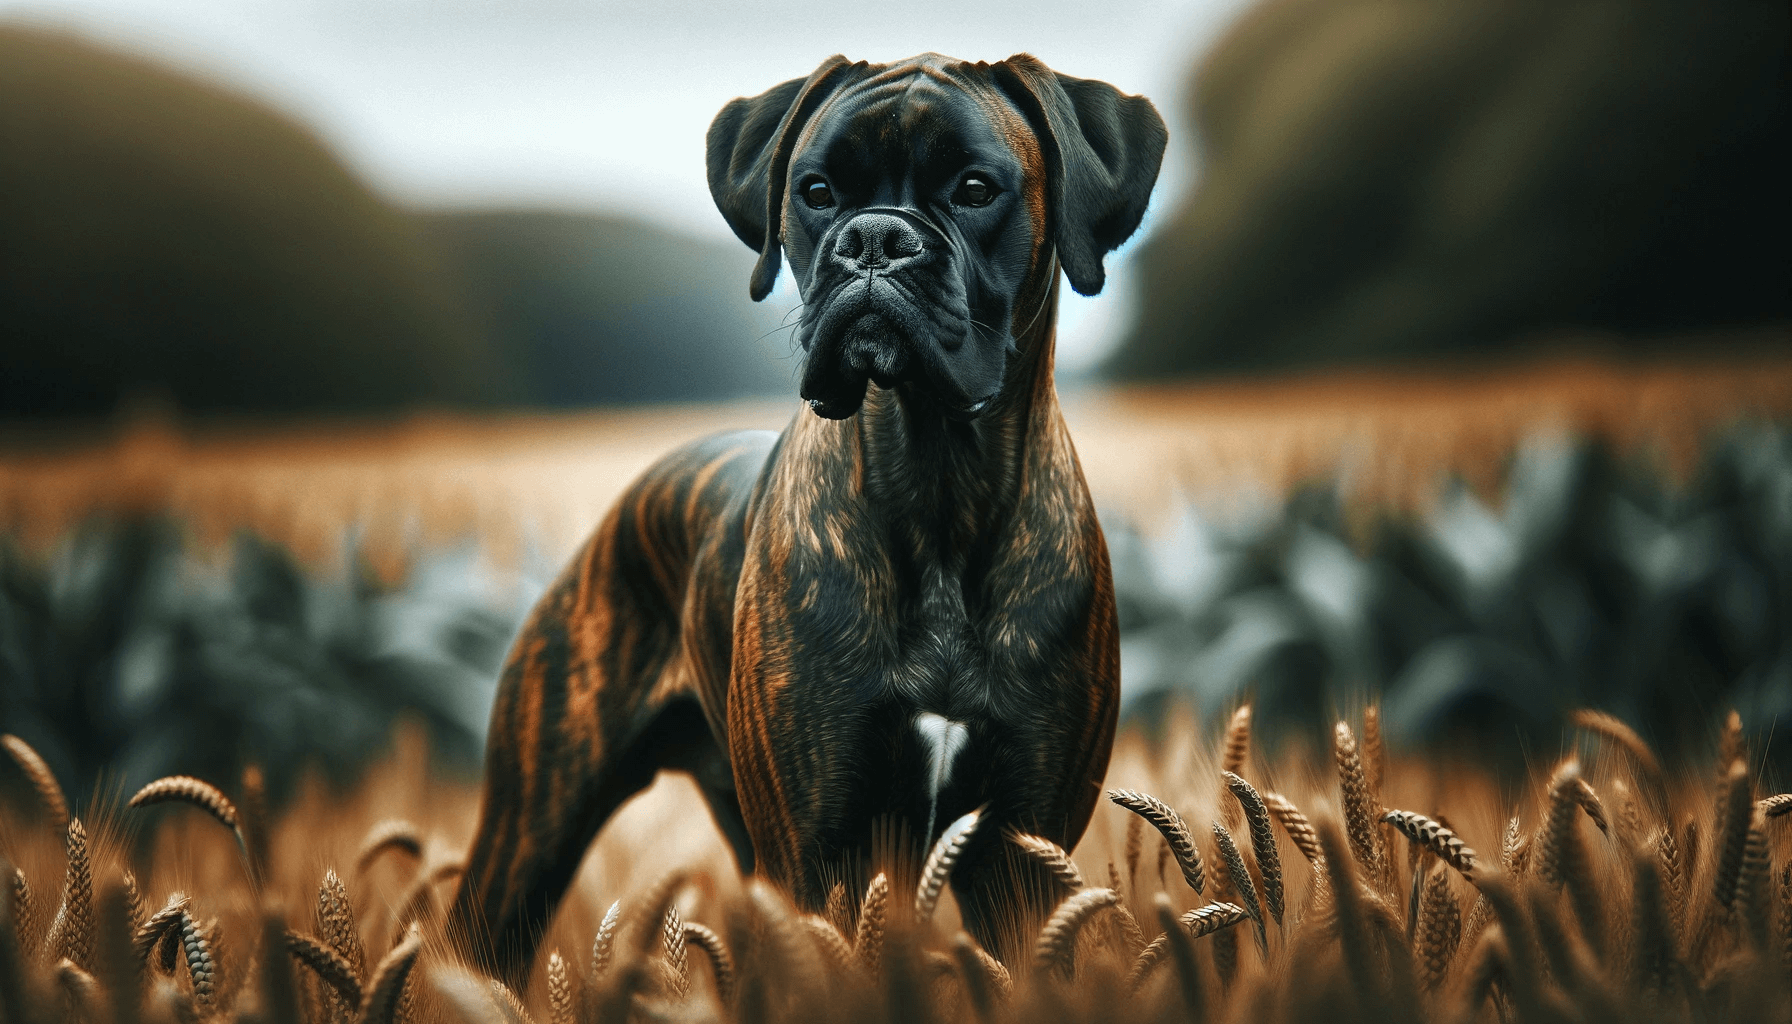 Brindle Boxador (Boxer Lab Mix) standing in a field with a distinctive coat pattern, its posture alert and attentive.